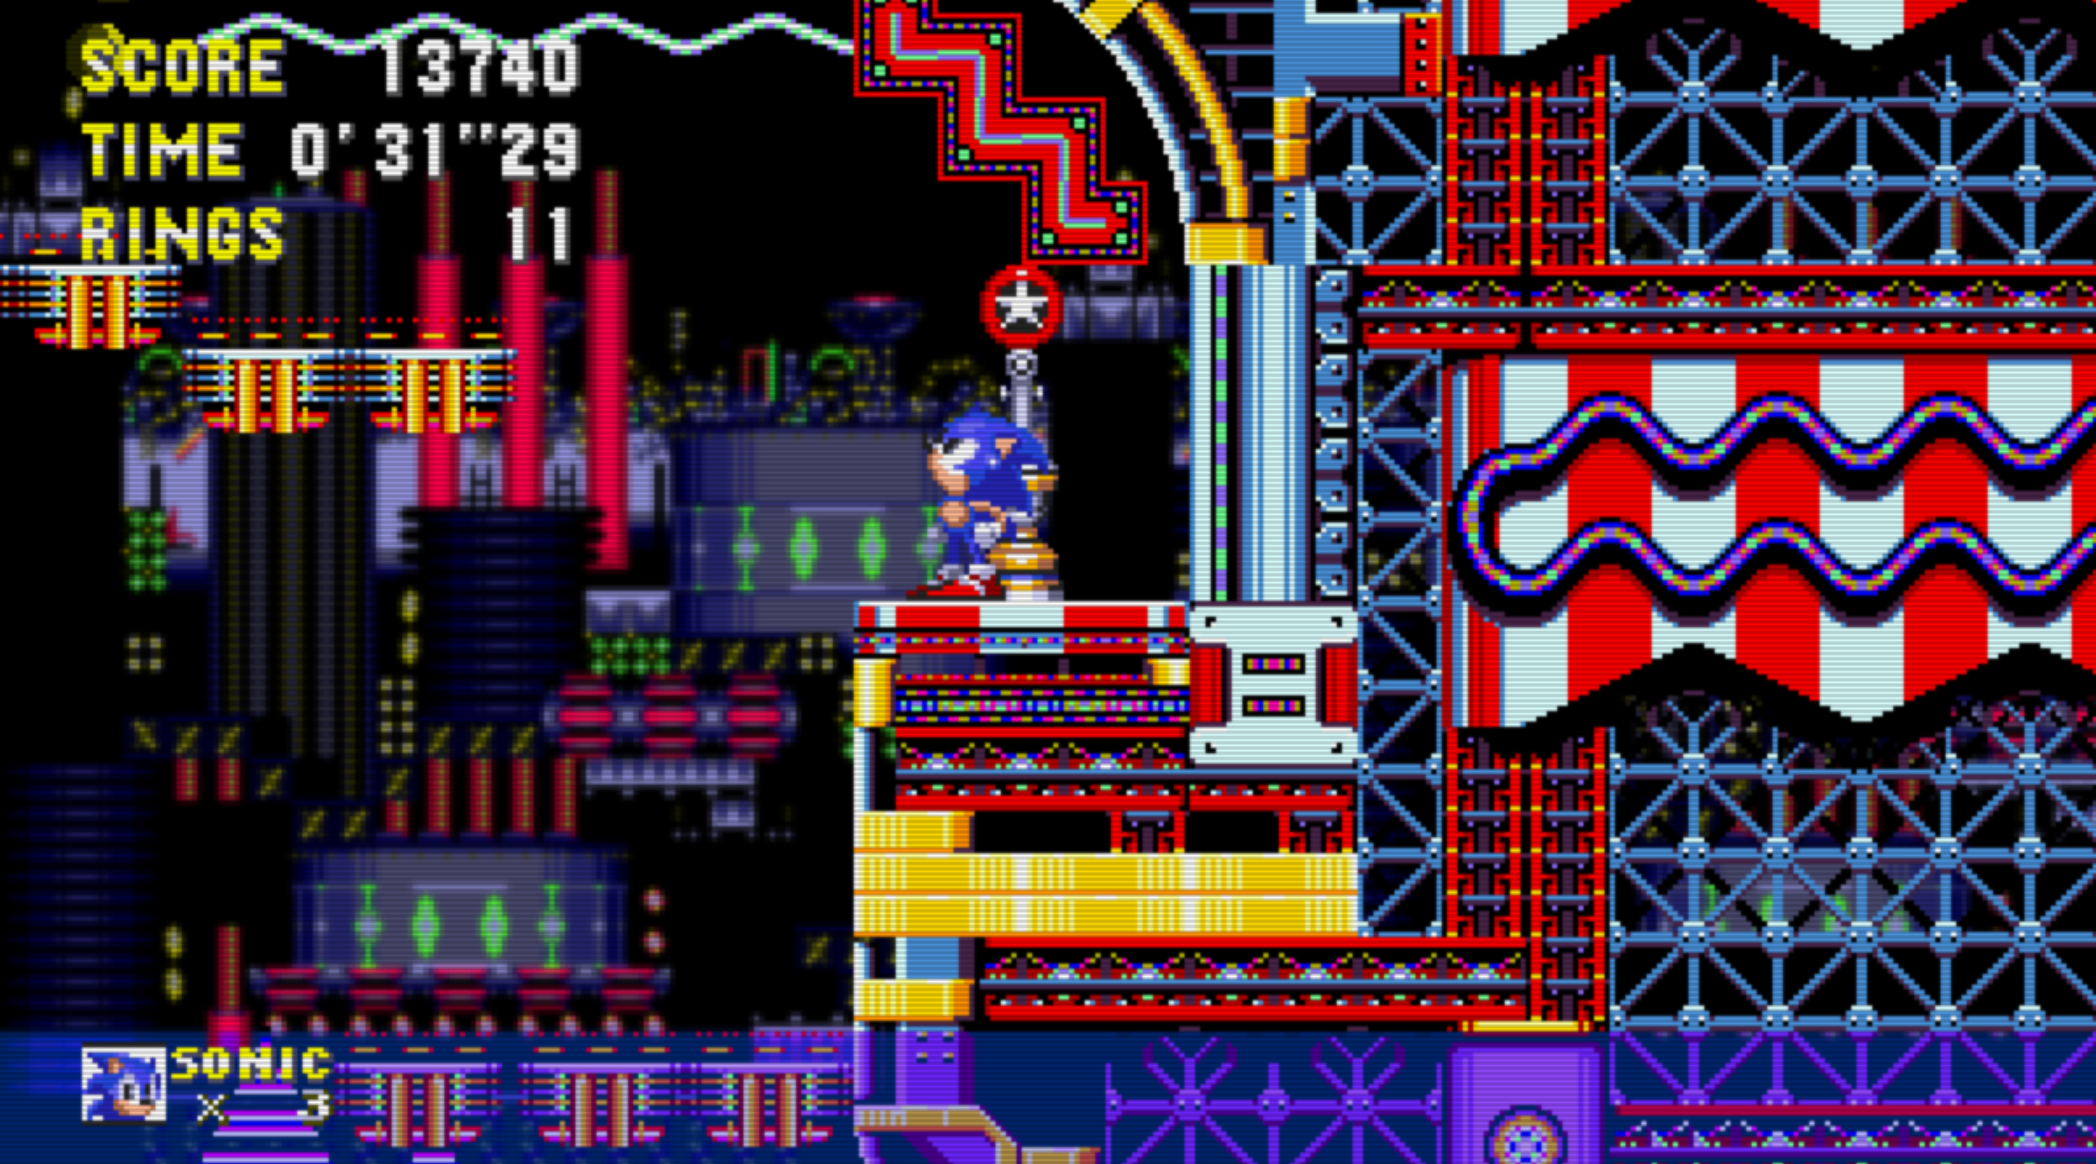 Uzmovi com sonic 3. Sonic 3 Air. Sonic 3 Air ROM. Sonic 3 and Knuckles ROM АИР. Sonic 3 Air Android.